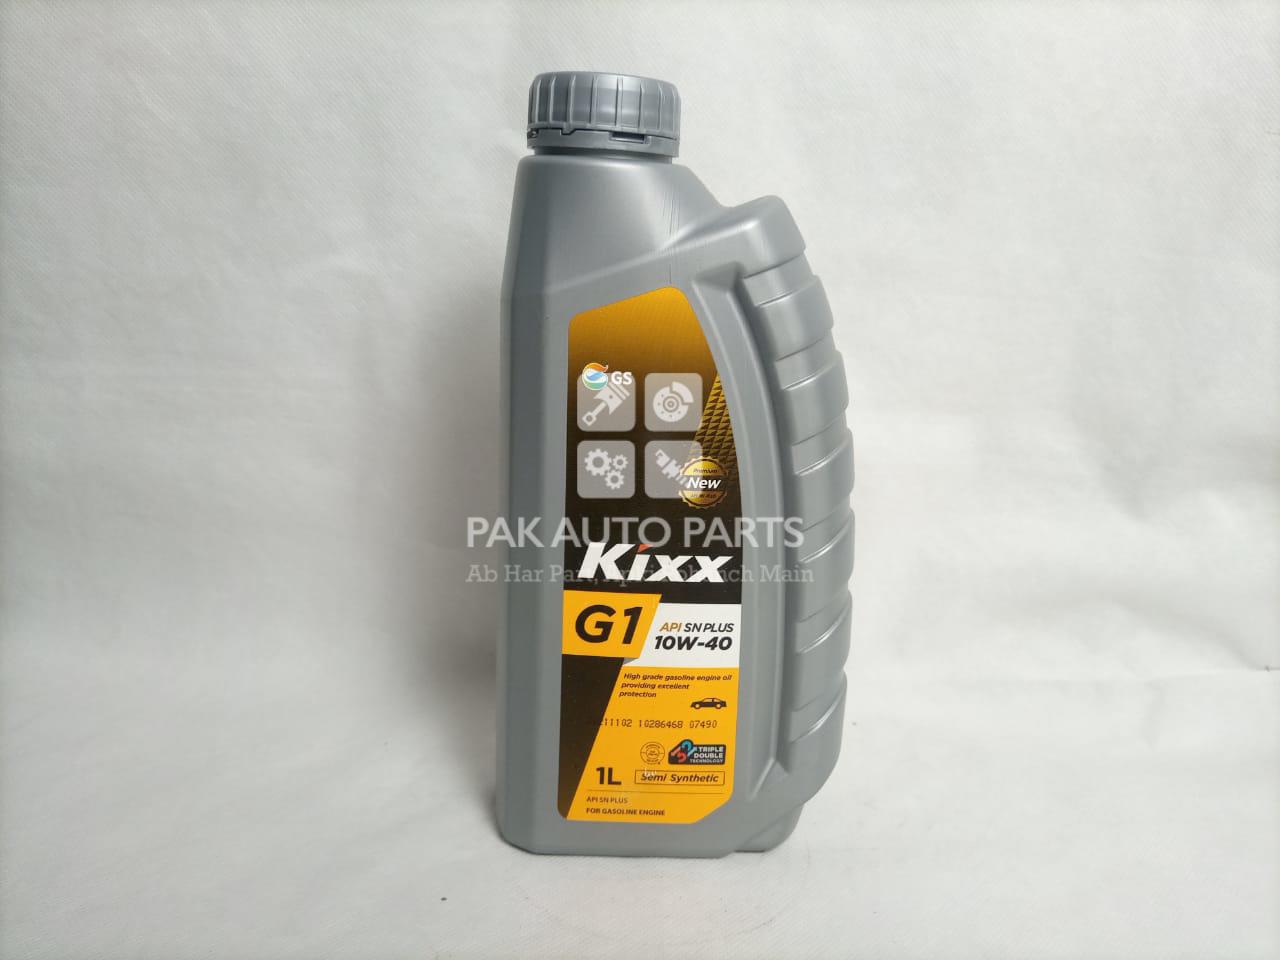 Picture of KIXX G1 SN Plus API 10W-40 (1L) is a high performance gasoline engine oil